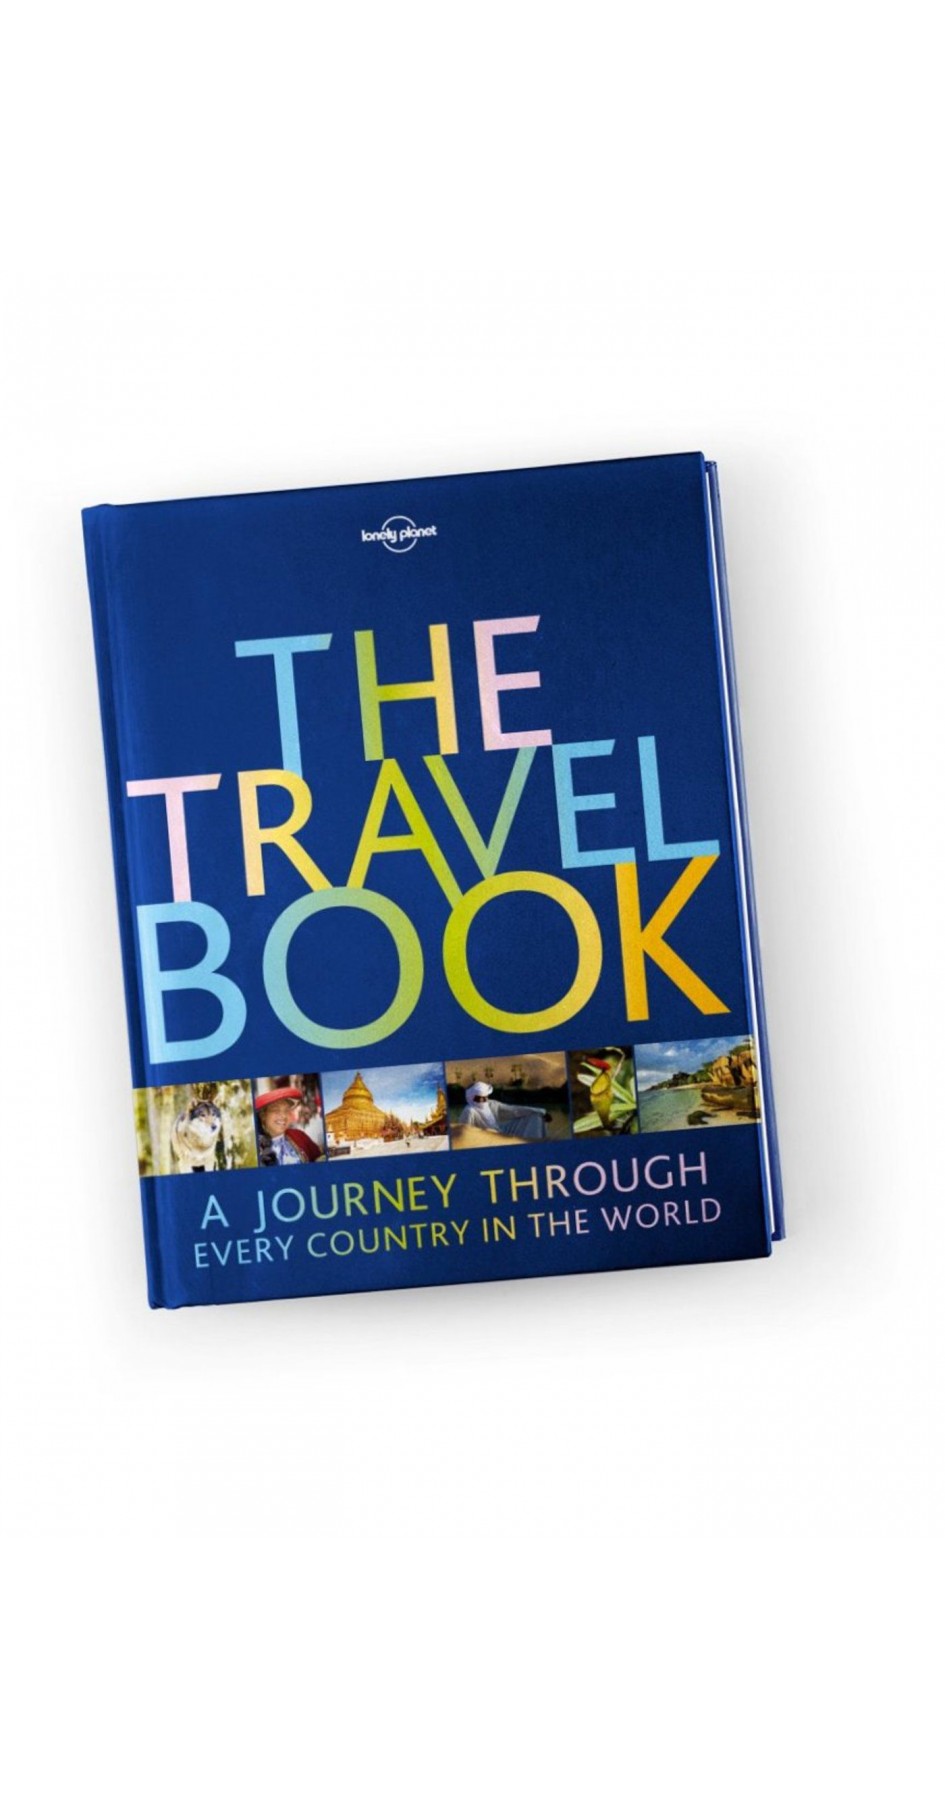 The Travel Book 